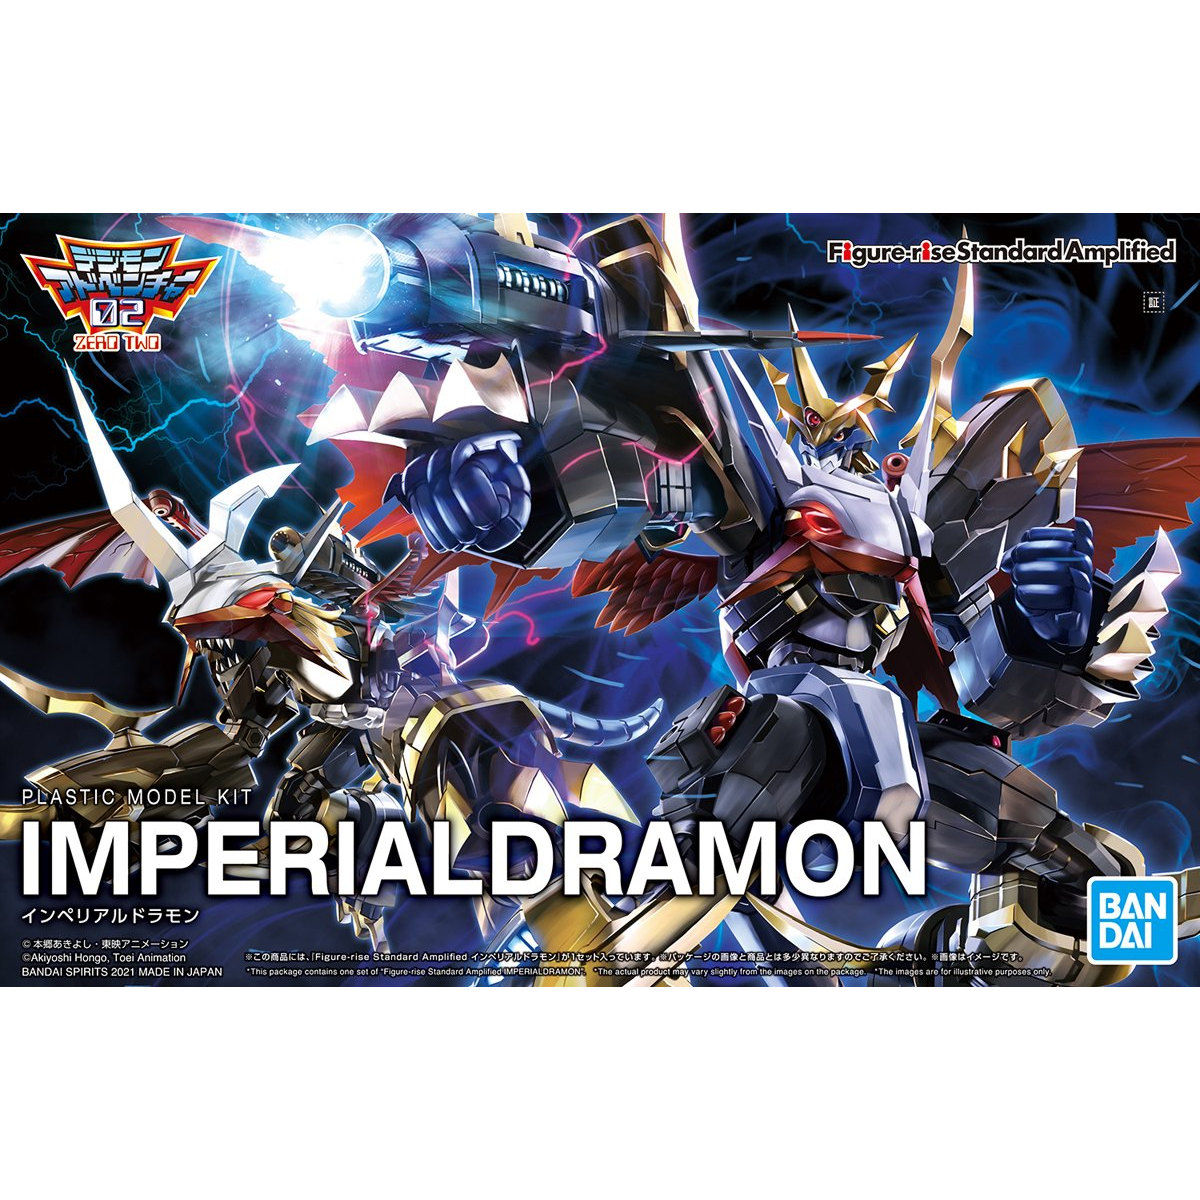 Imperial Dramon - Figure-rise Standard Amplified 帝皇龍甲獸